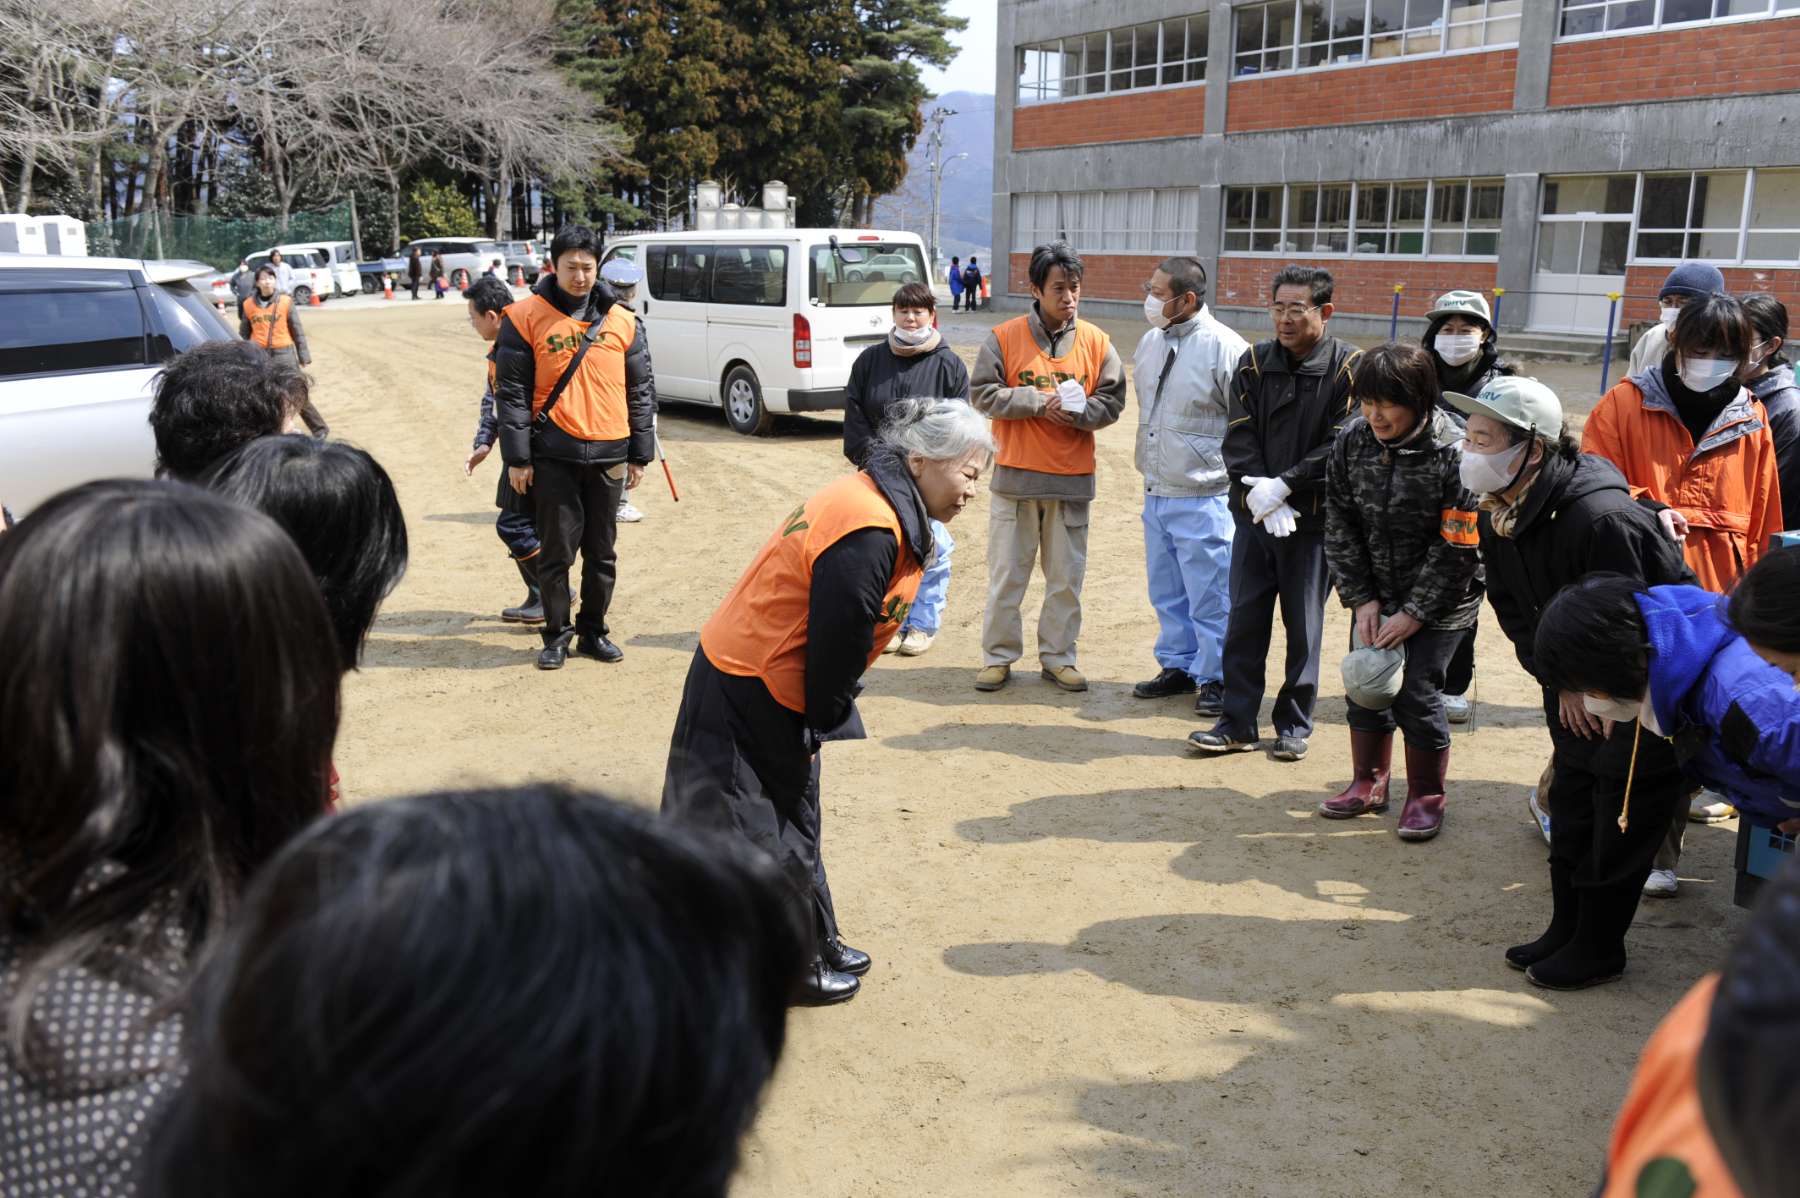 Her Holiness, white haired and wearing an orange safety vest, bows to a group of Japanese people, some wearing masks and gloves, in a sand-covered parking lot.